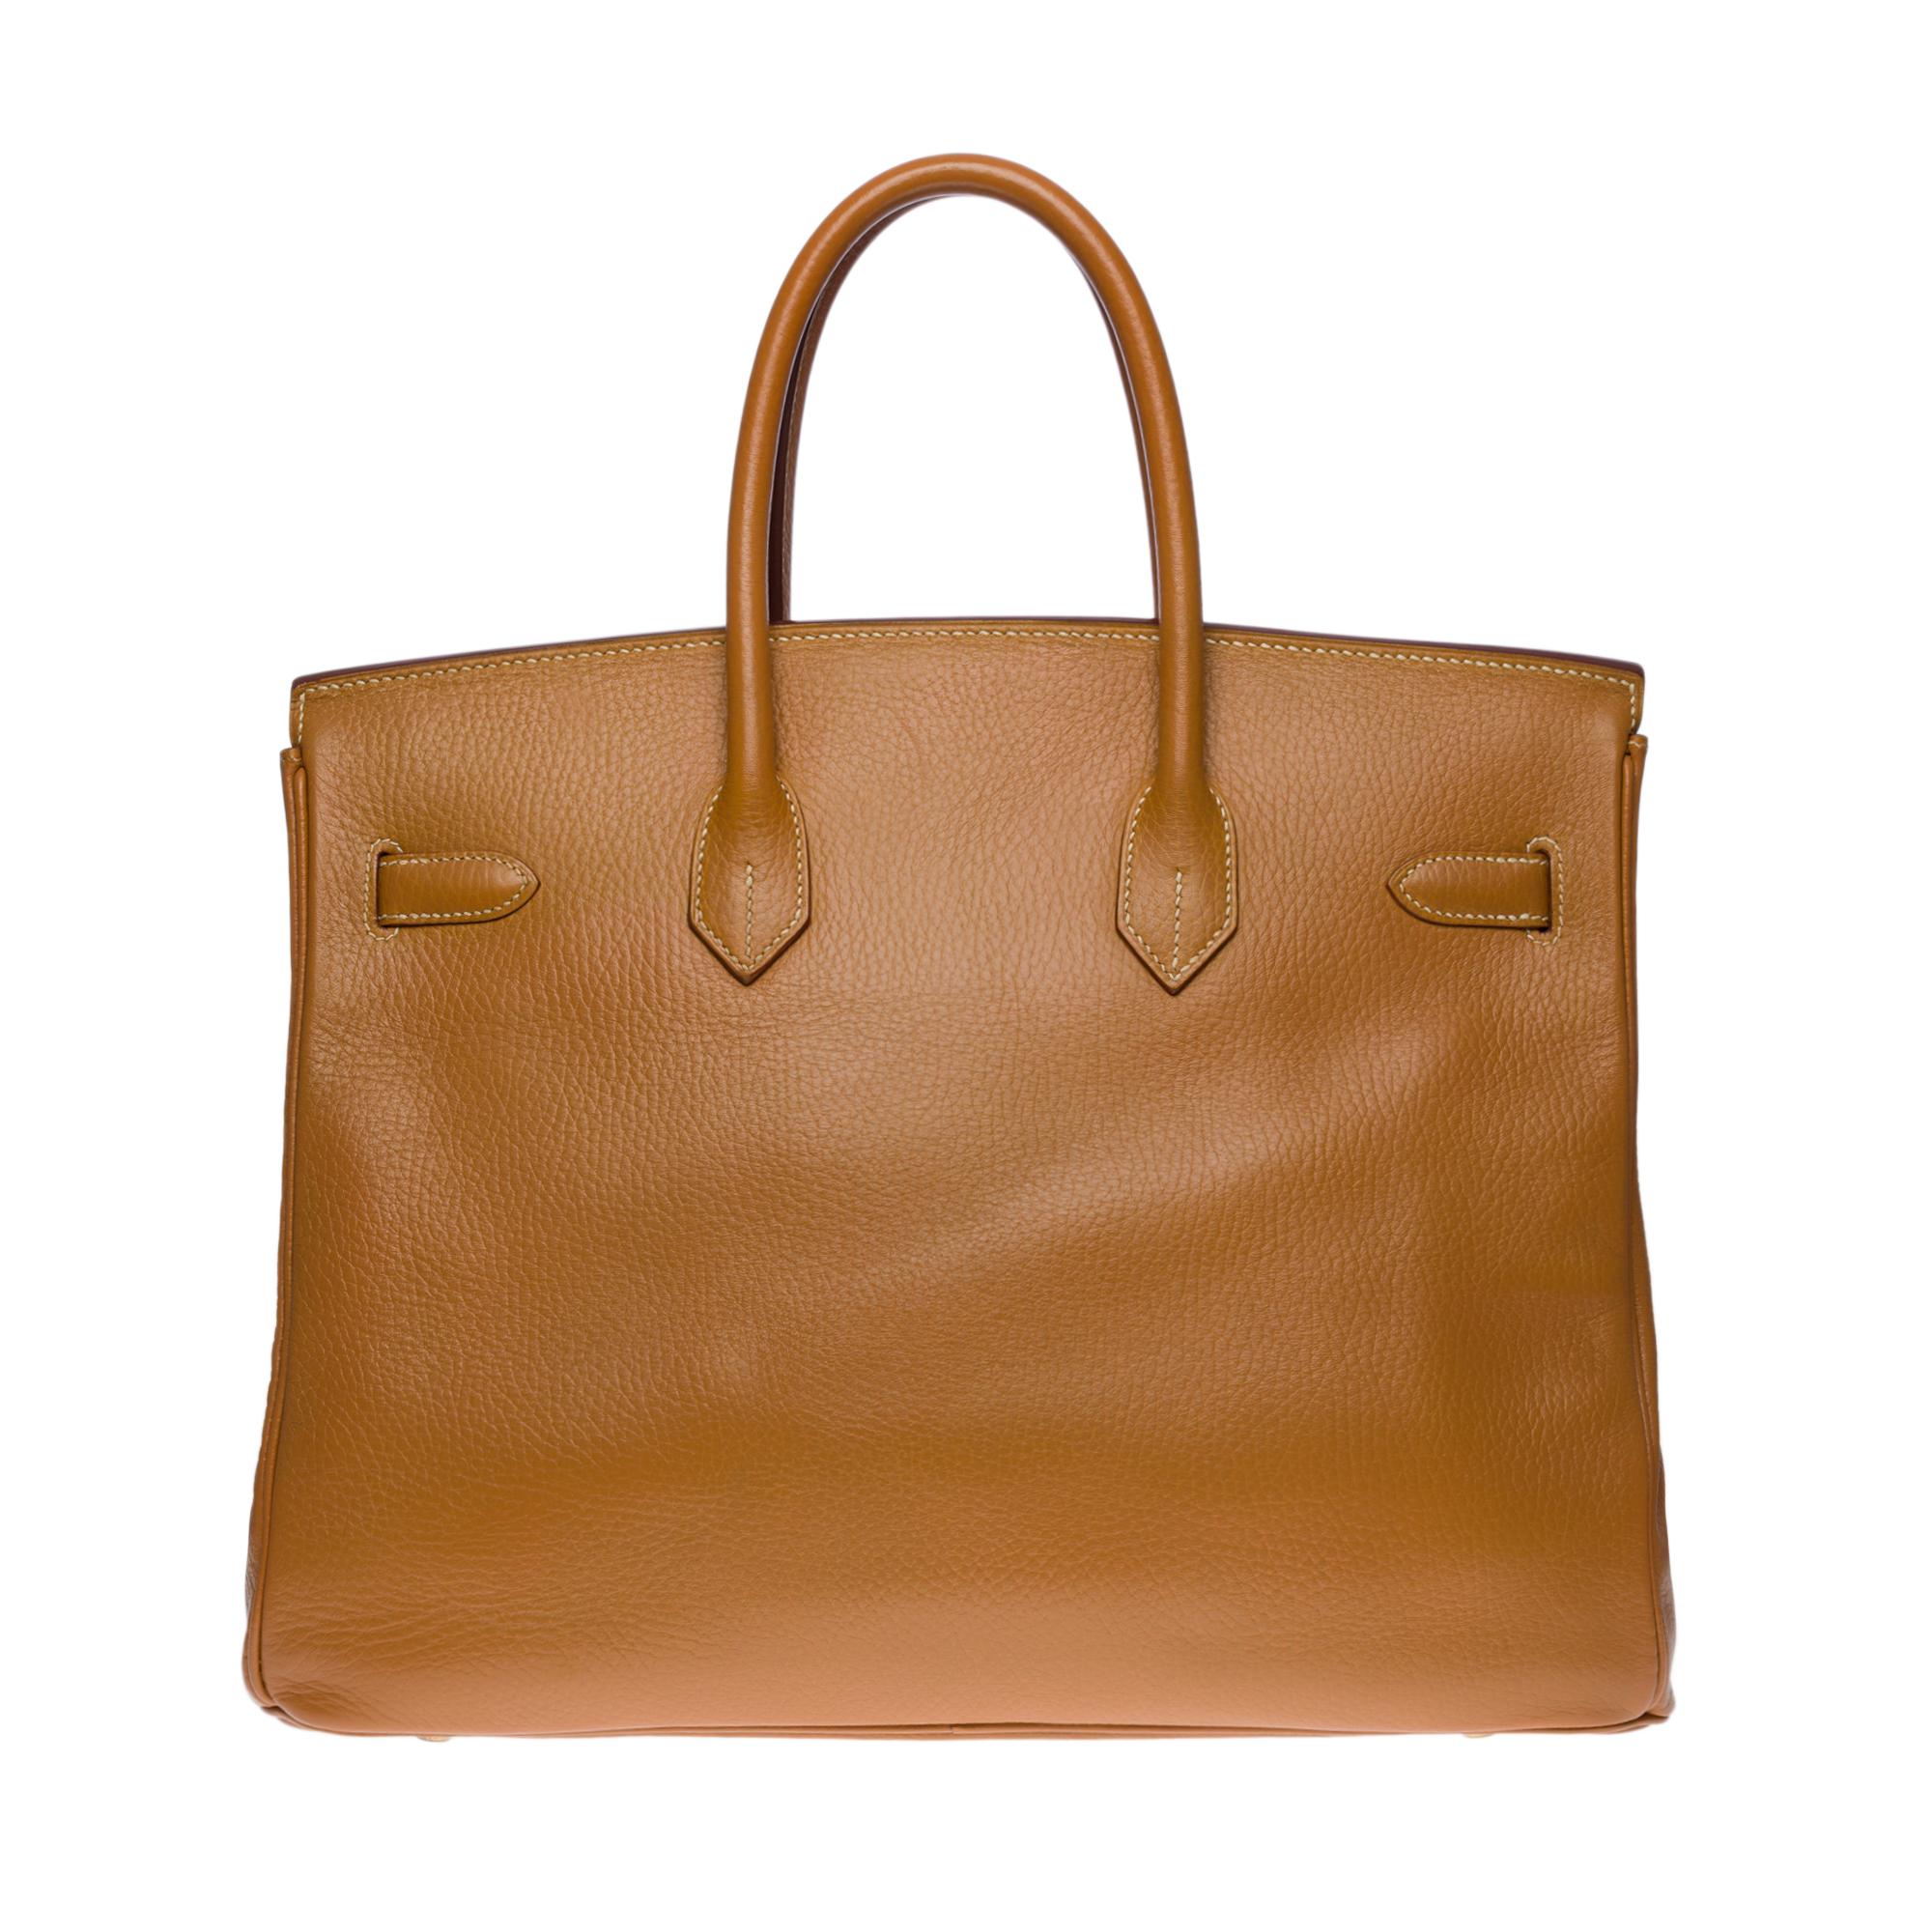 Splendid and very Rare Birkin 35 handbag in Gold Vache Ardennes leather (one of the most beautiful and sought after leathers of the house Hermès) , gold plated metal hardware, double handle in gold leather allowing a hand-held

Flap closure
Inner